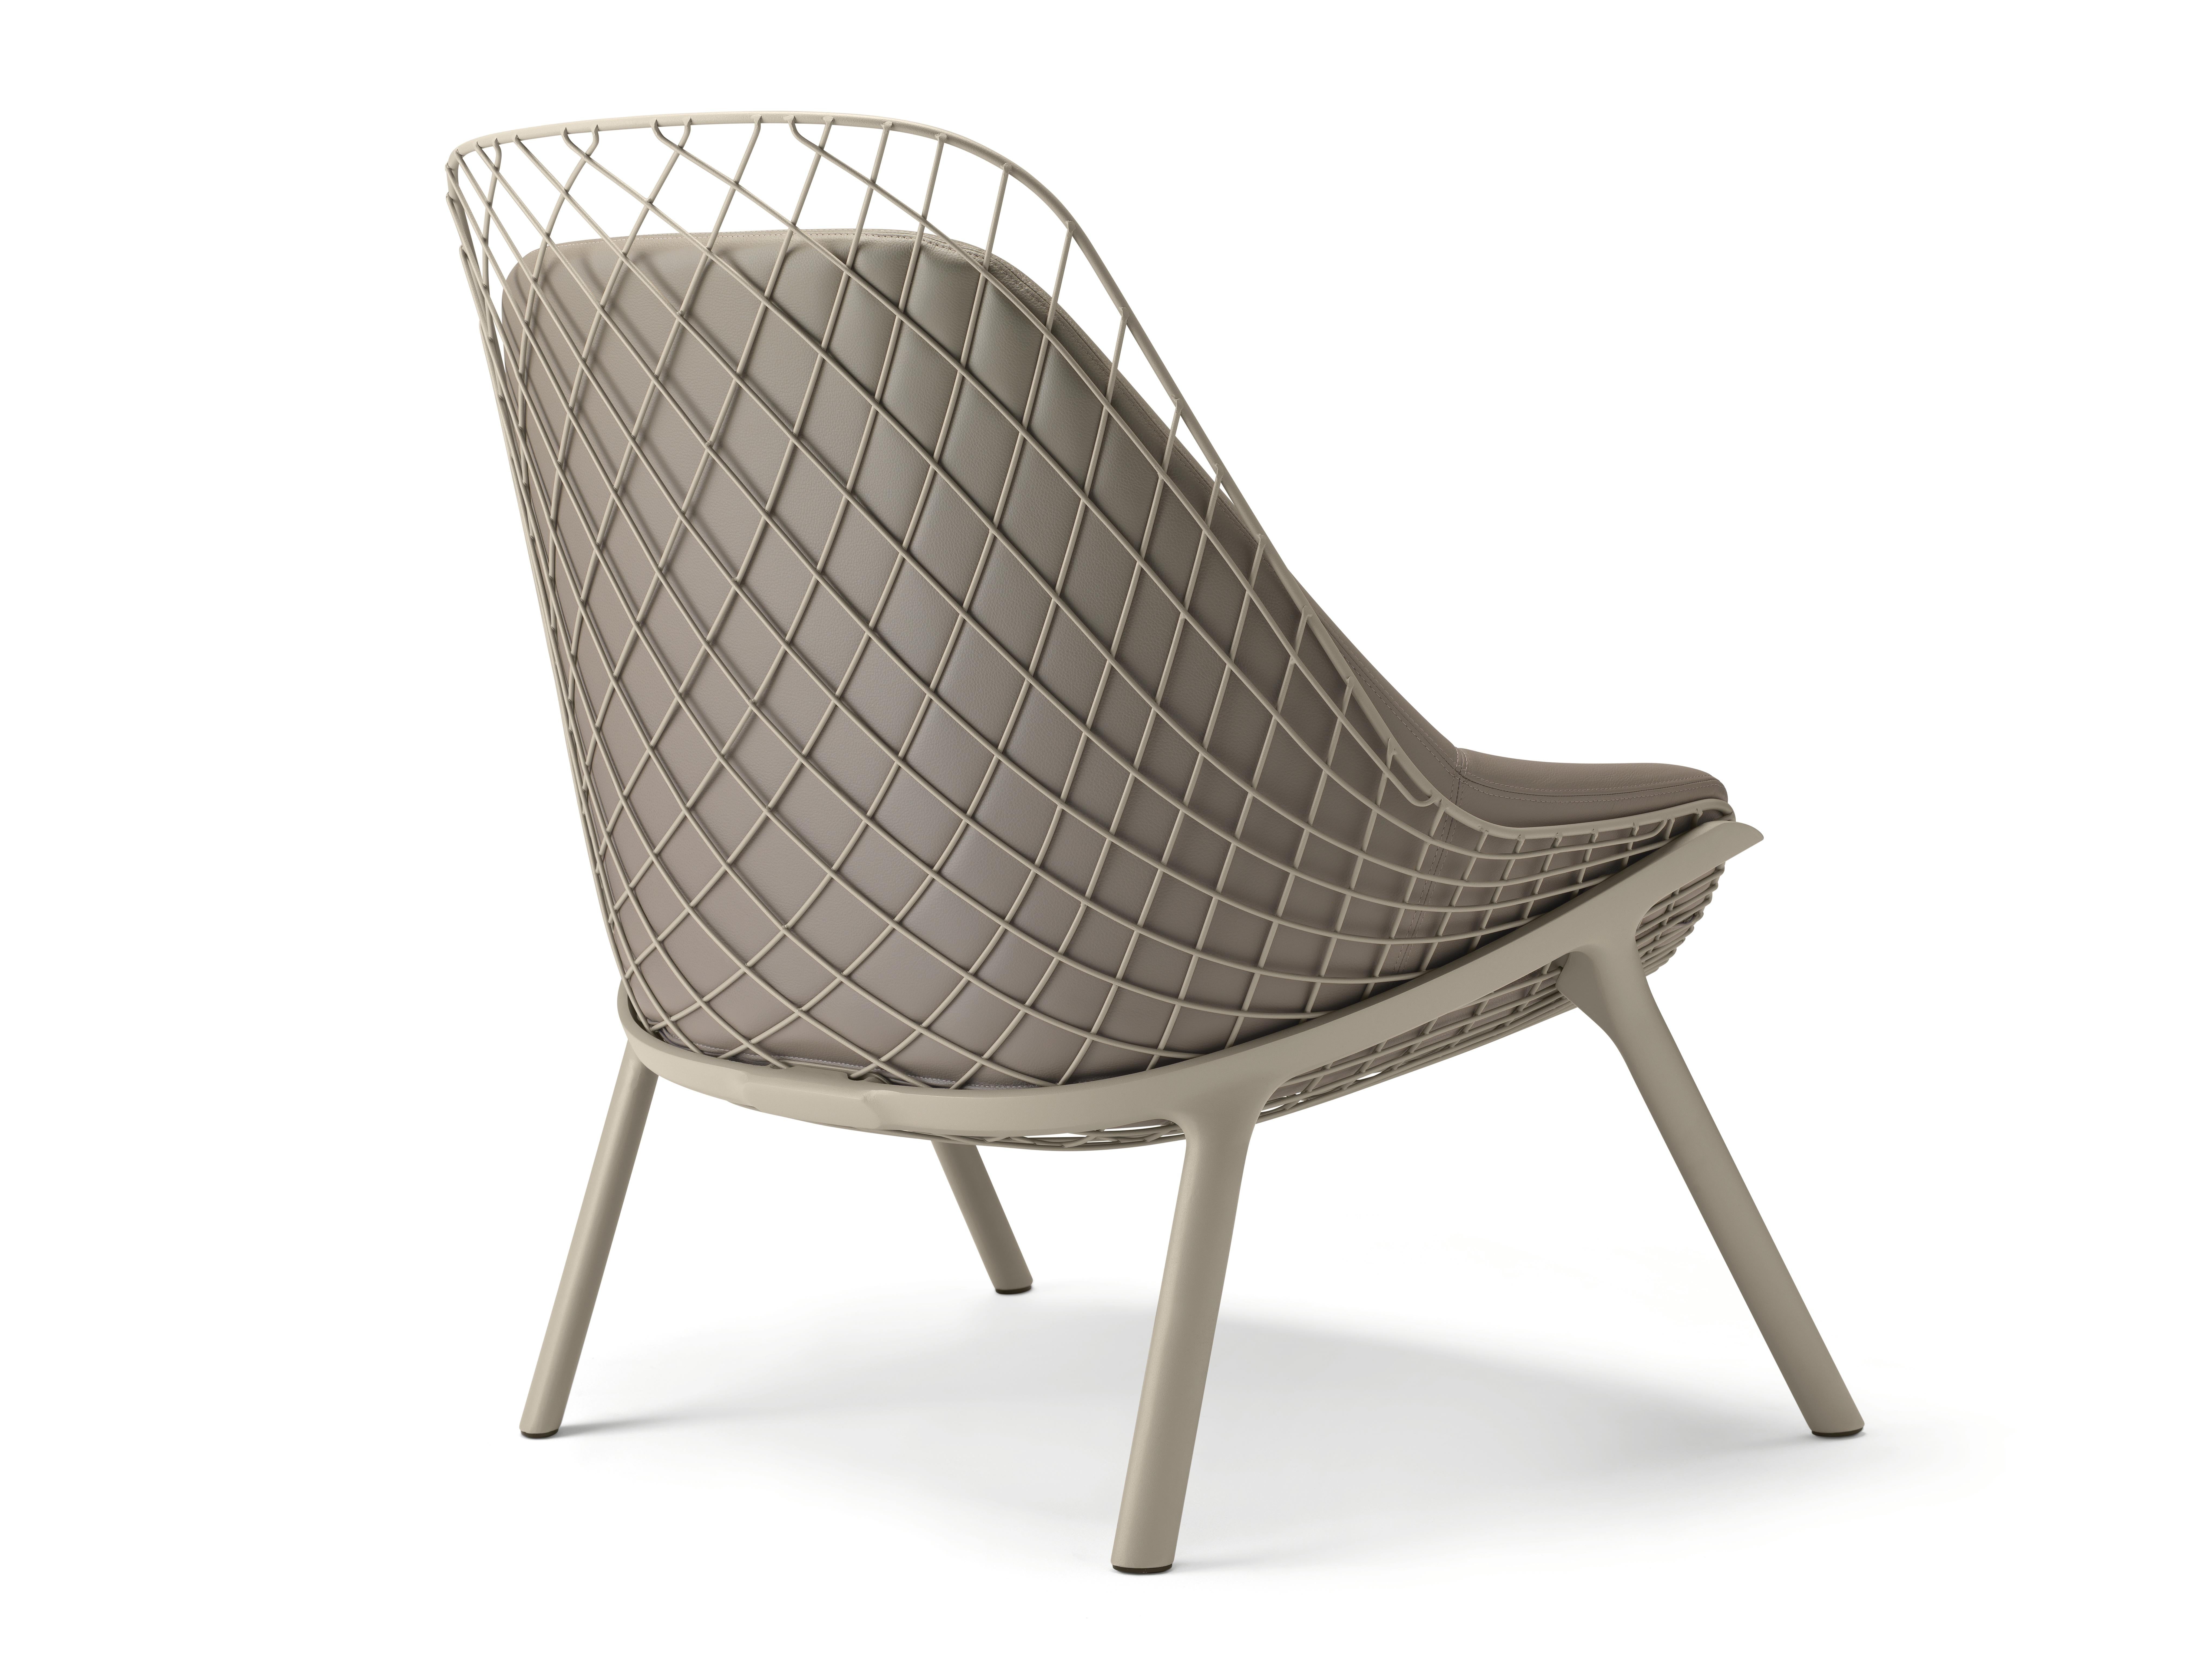 Alias 035 Gran Kobi Outdoor Armchair with Pad and Sand Lacquered Aluminum Frame by Patrick Norguet

Armchair with shell in lacquered steel; support belt and legs in lacquered aluminium. Cushion in expanded polyuretane upholstered in fabric or